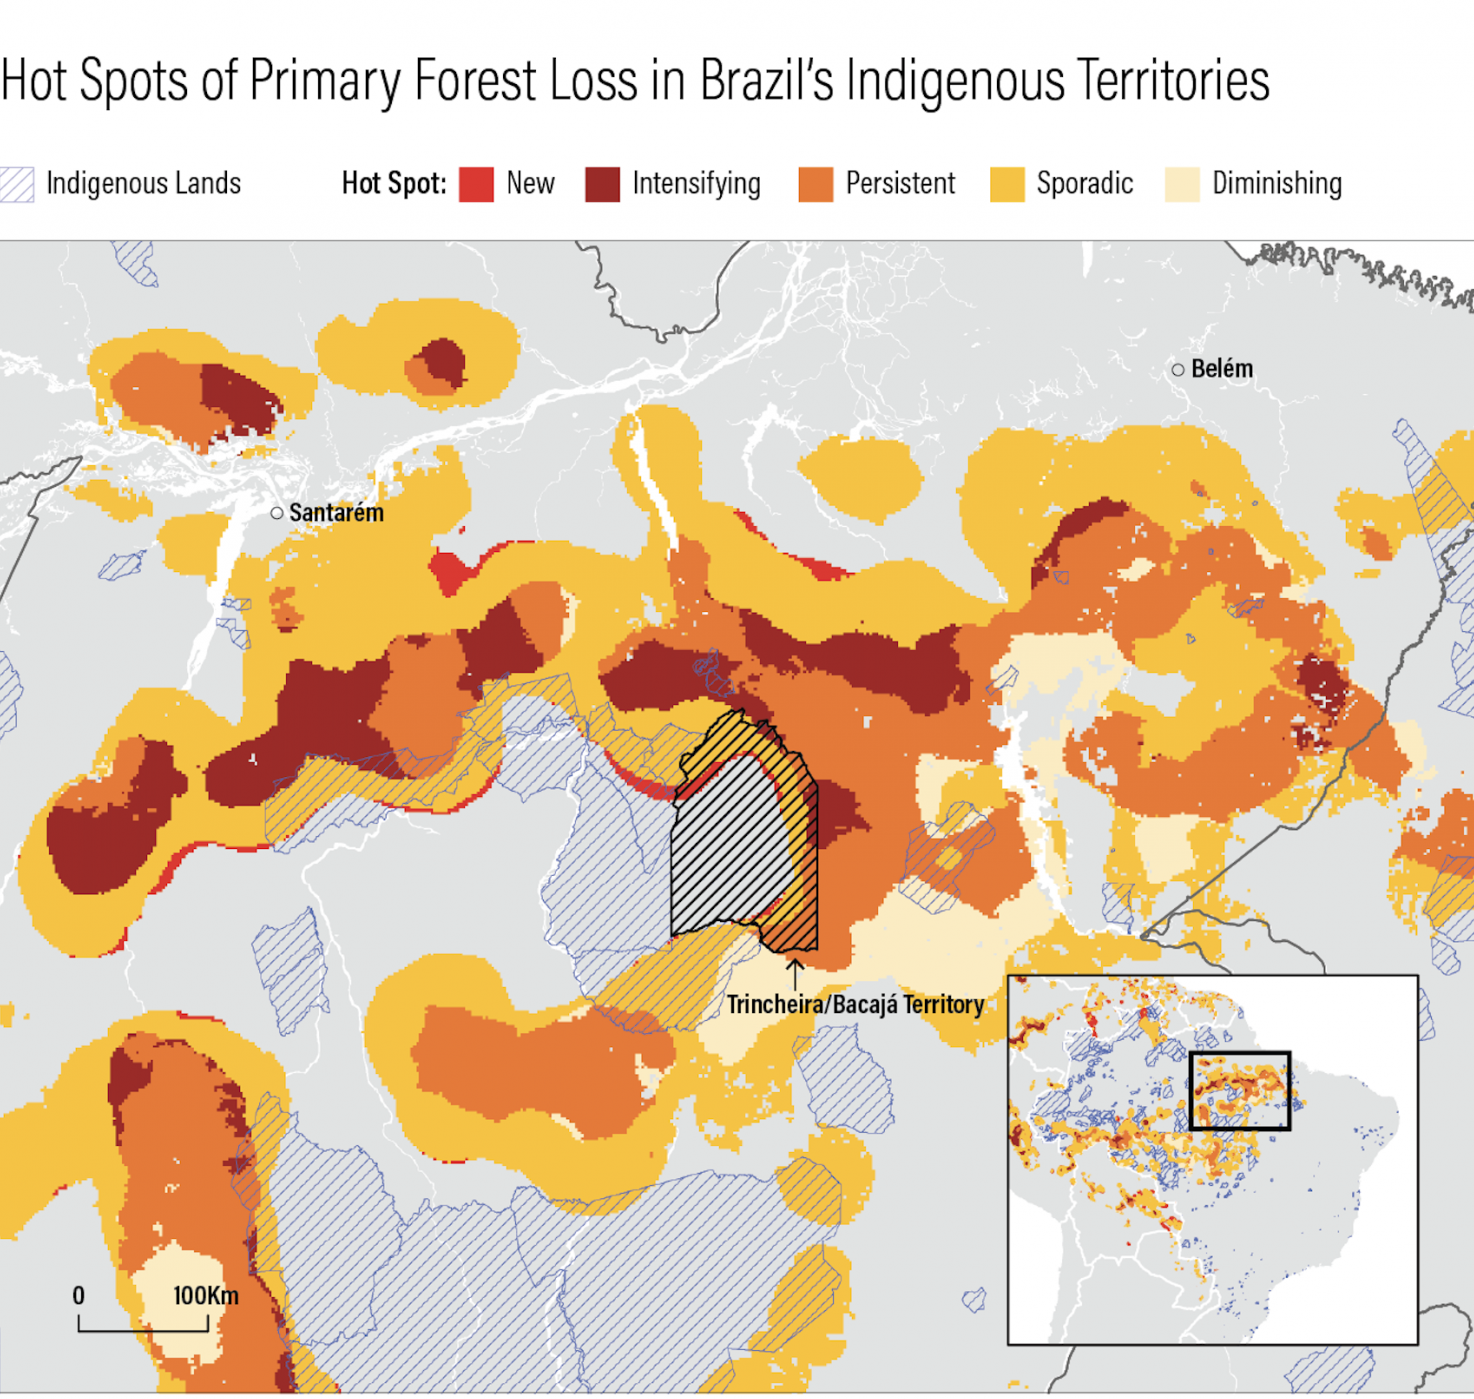 Hot spots of forest loss in Brazil's indigenous territories